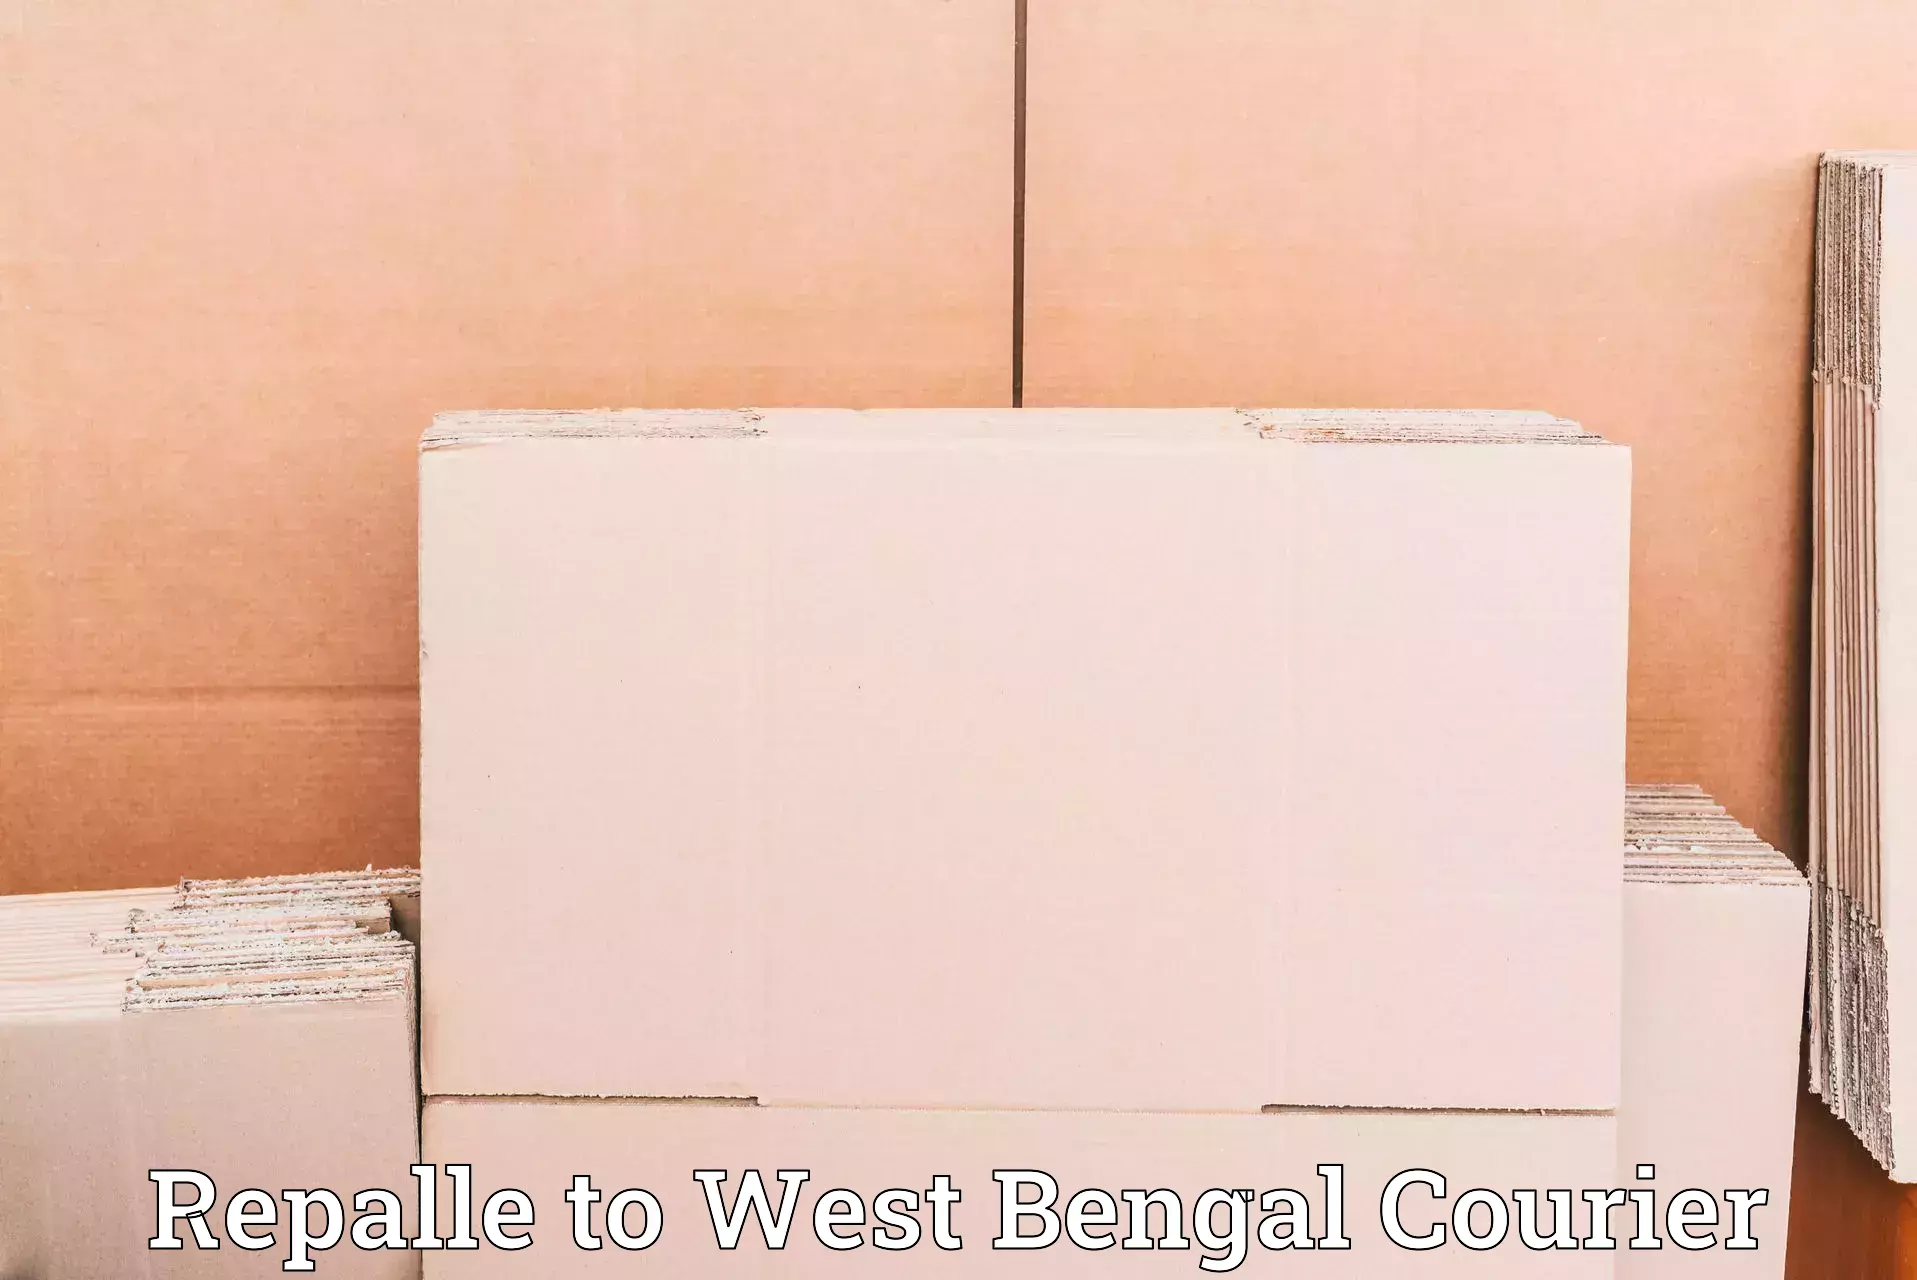 Business delivery service Repalle to West Bengal